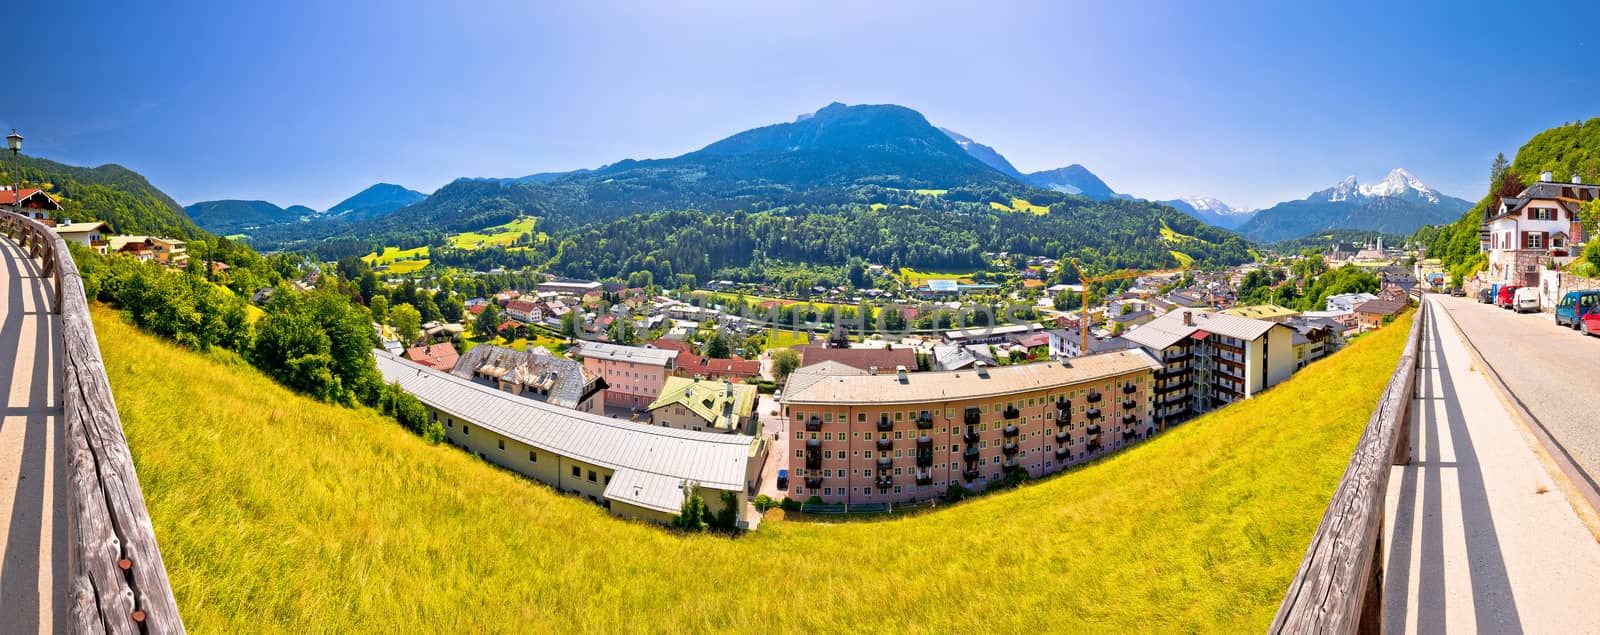 Town of Berchtesgaden and Alpine landscape panoramic view by xbrchx